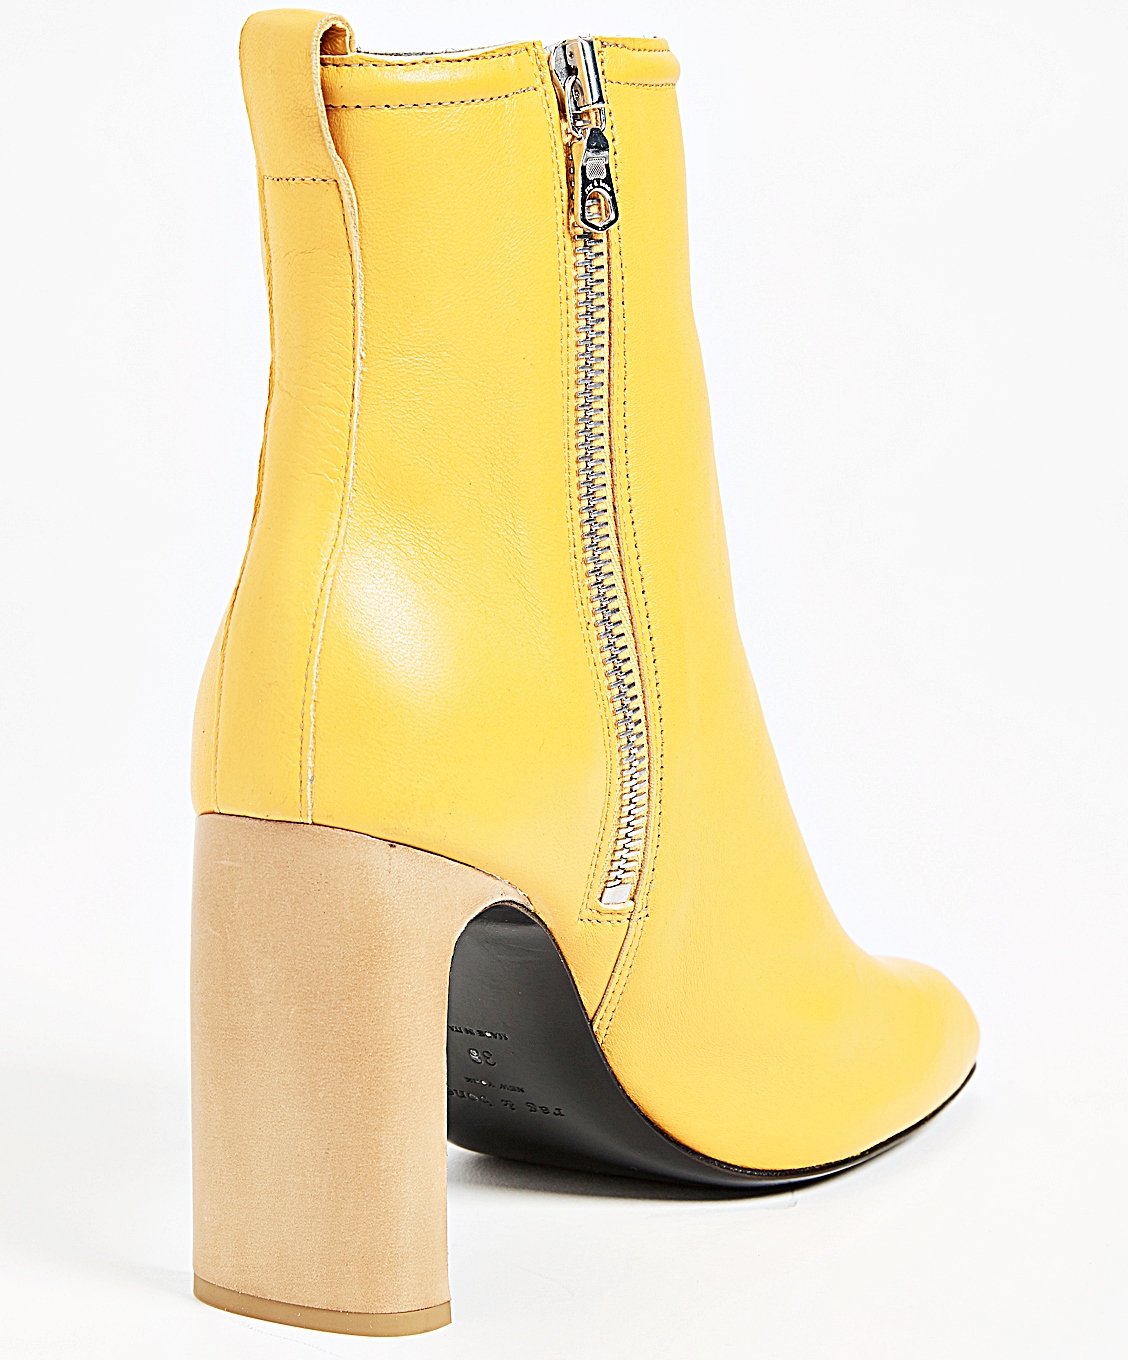 Shoe of the Day | Rag & Bone Ellis Boots | SHOEOGRAPHY